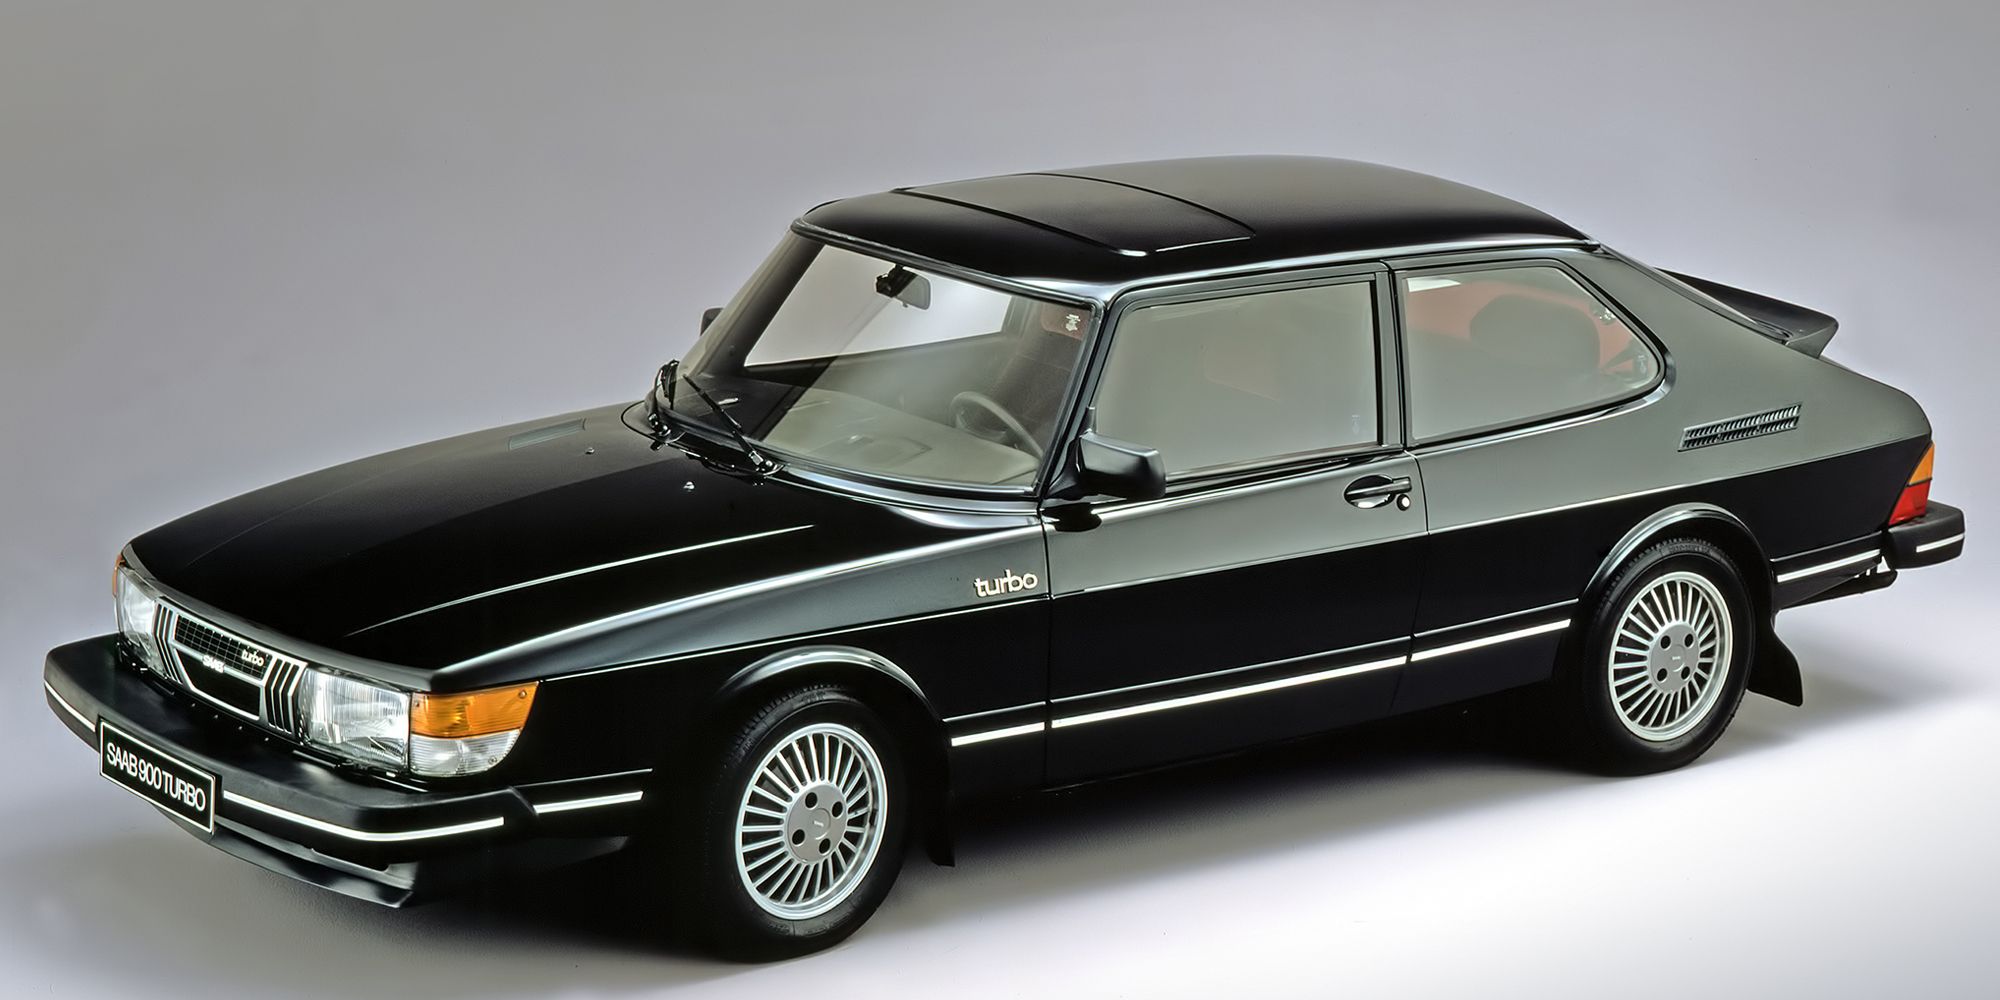 Front 3/4 view of an early black Saab 900 Turbo